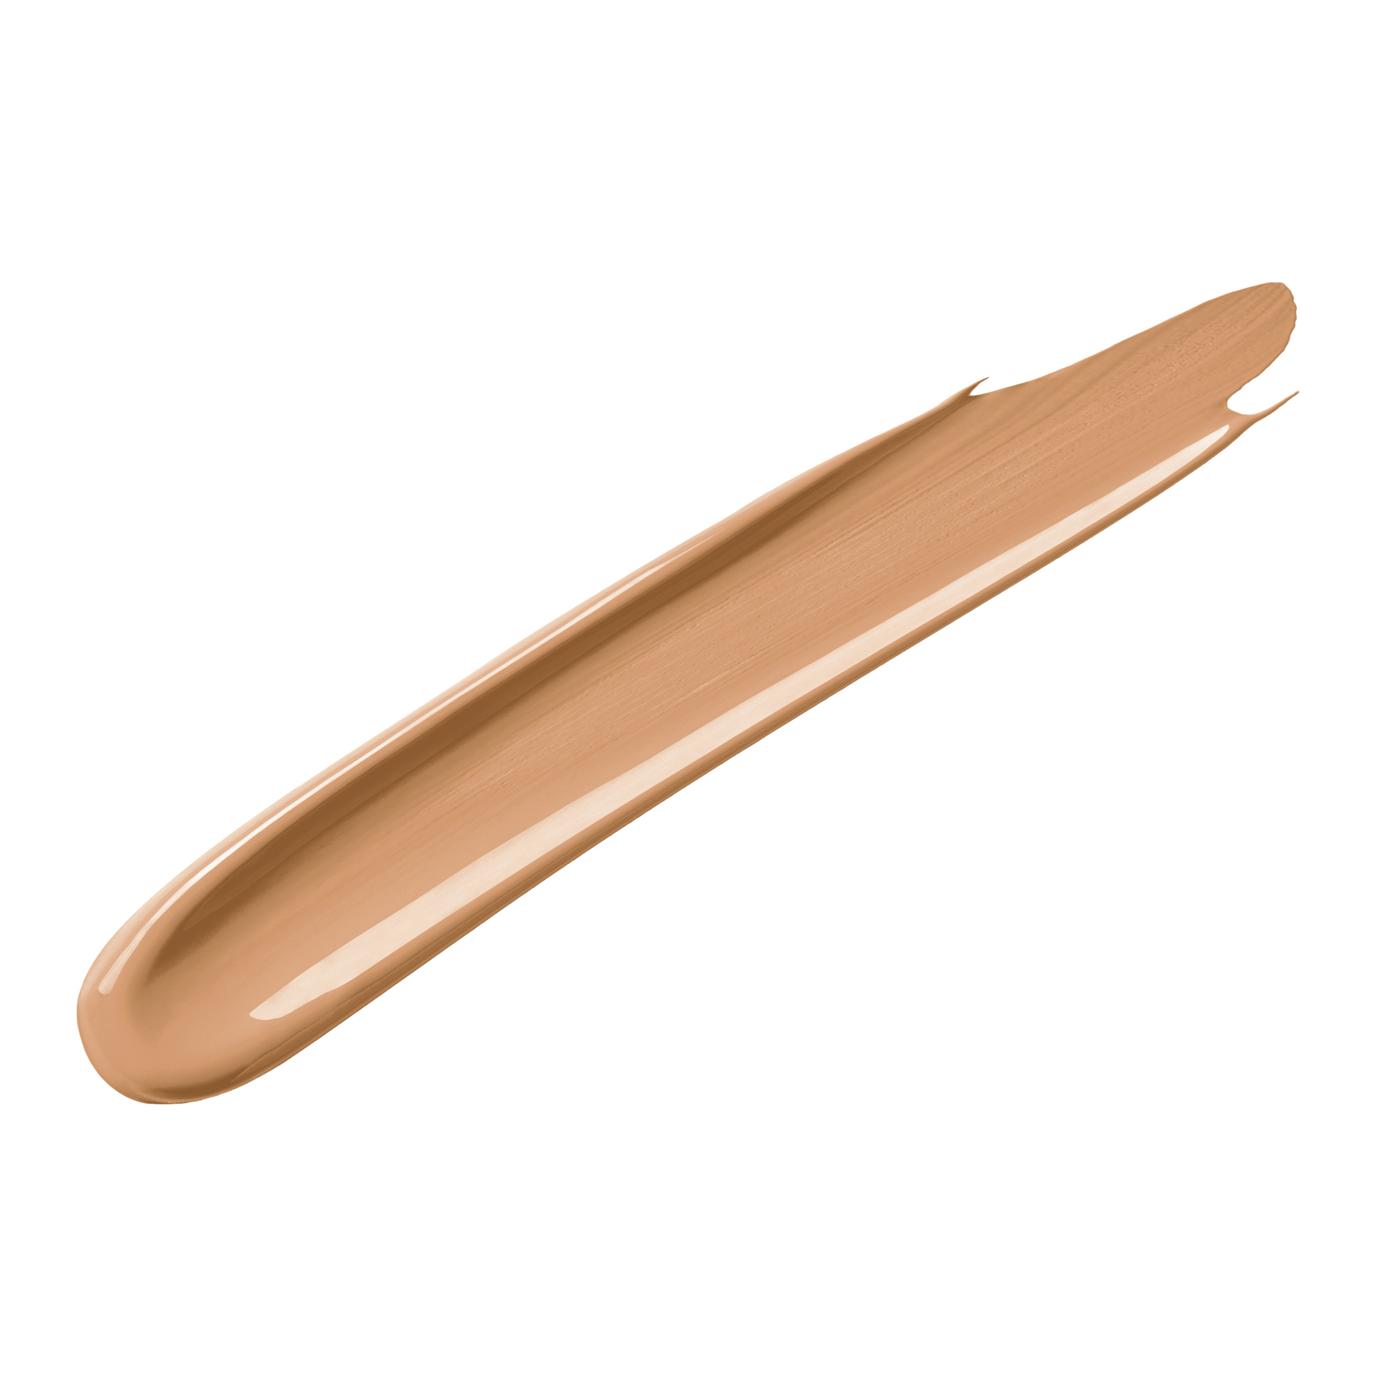 Covergirl Clean Invisible Concealer - Classic Tan; image 7 of 15